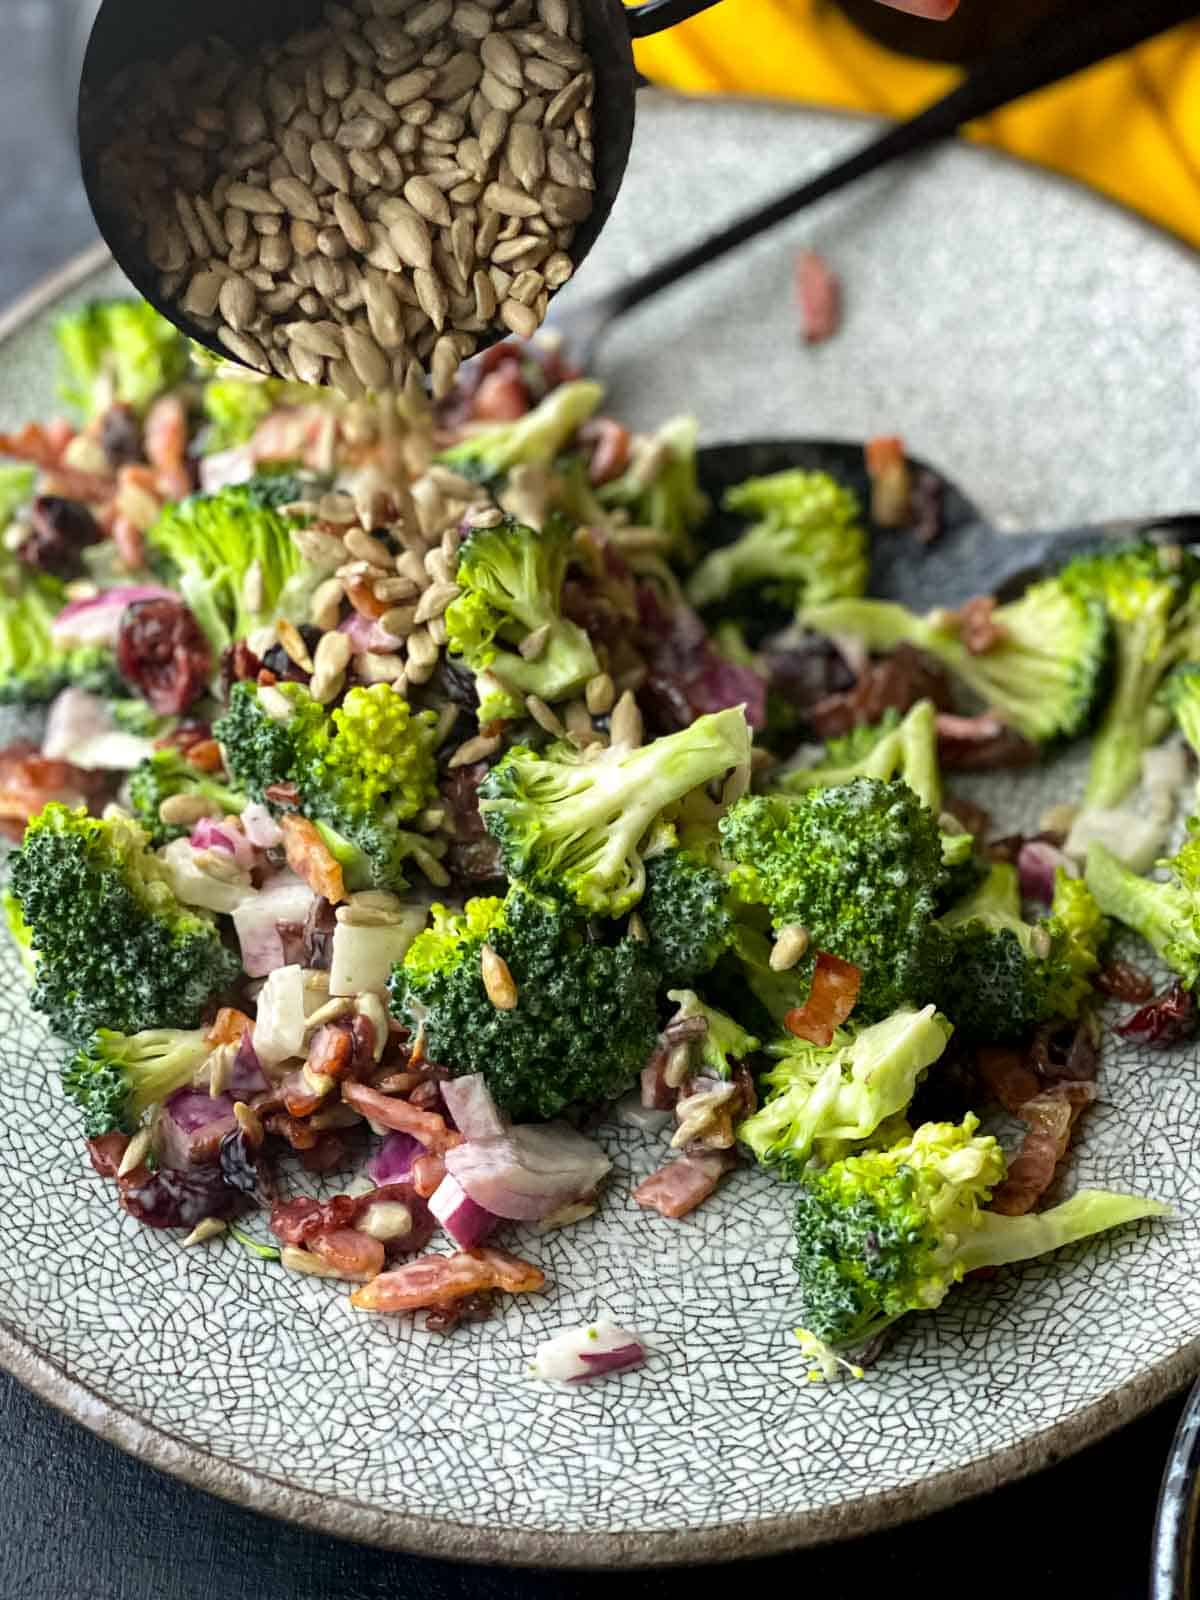 a plate of broccoli salad with sunflower seeds being sprinkled on top